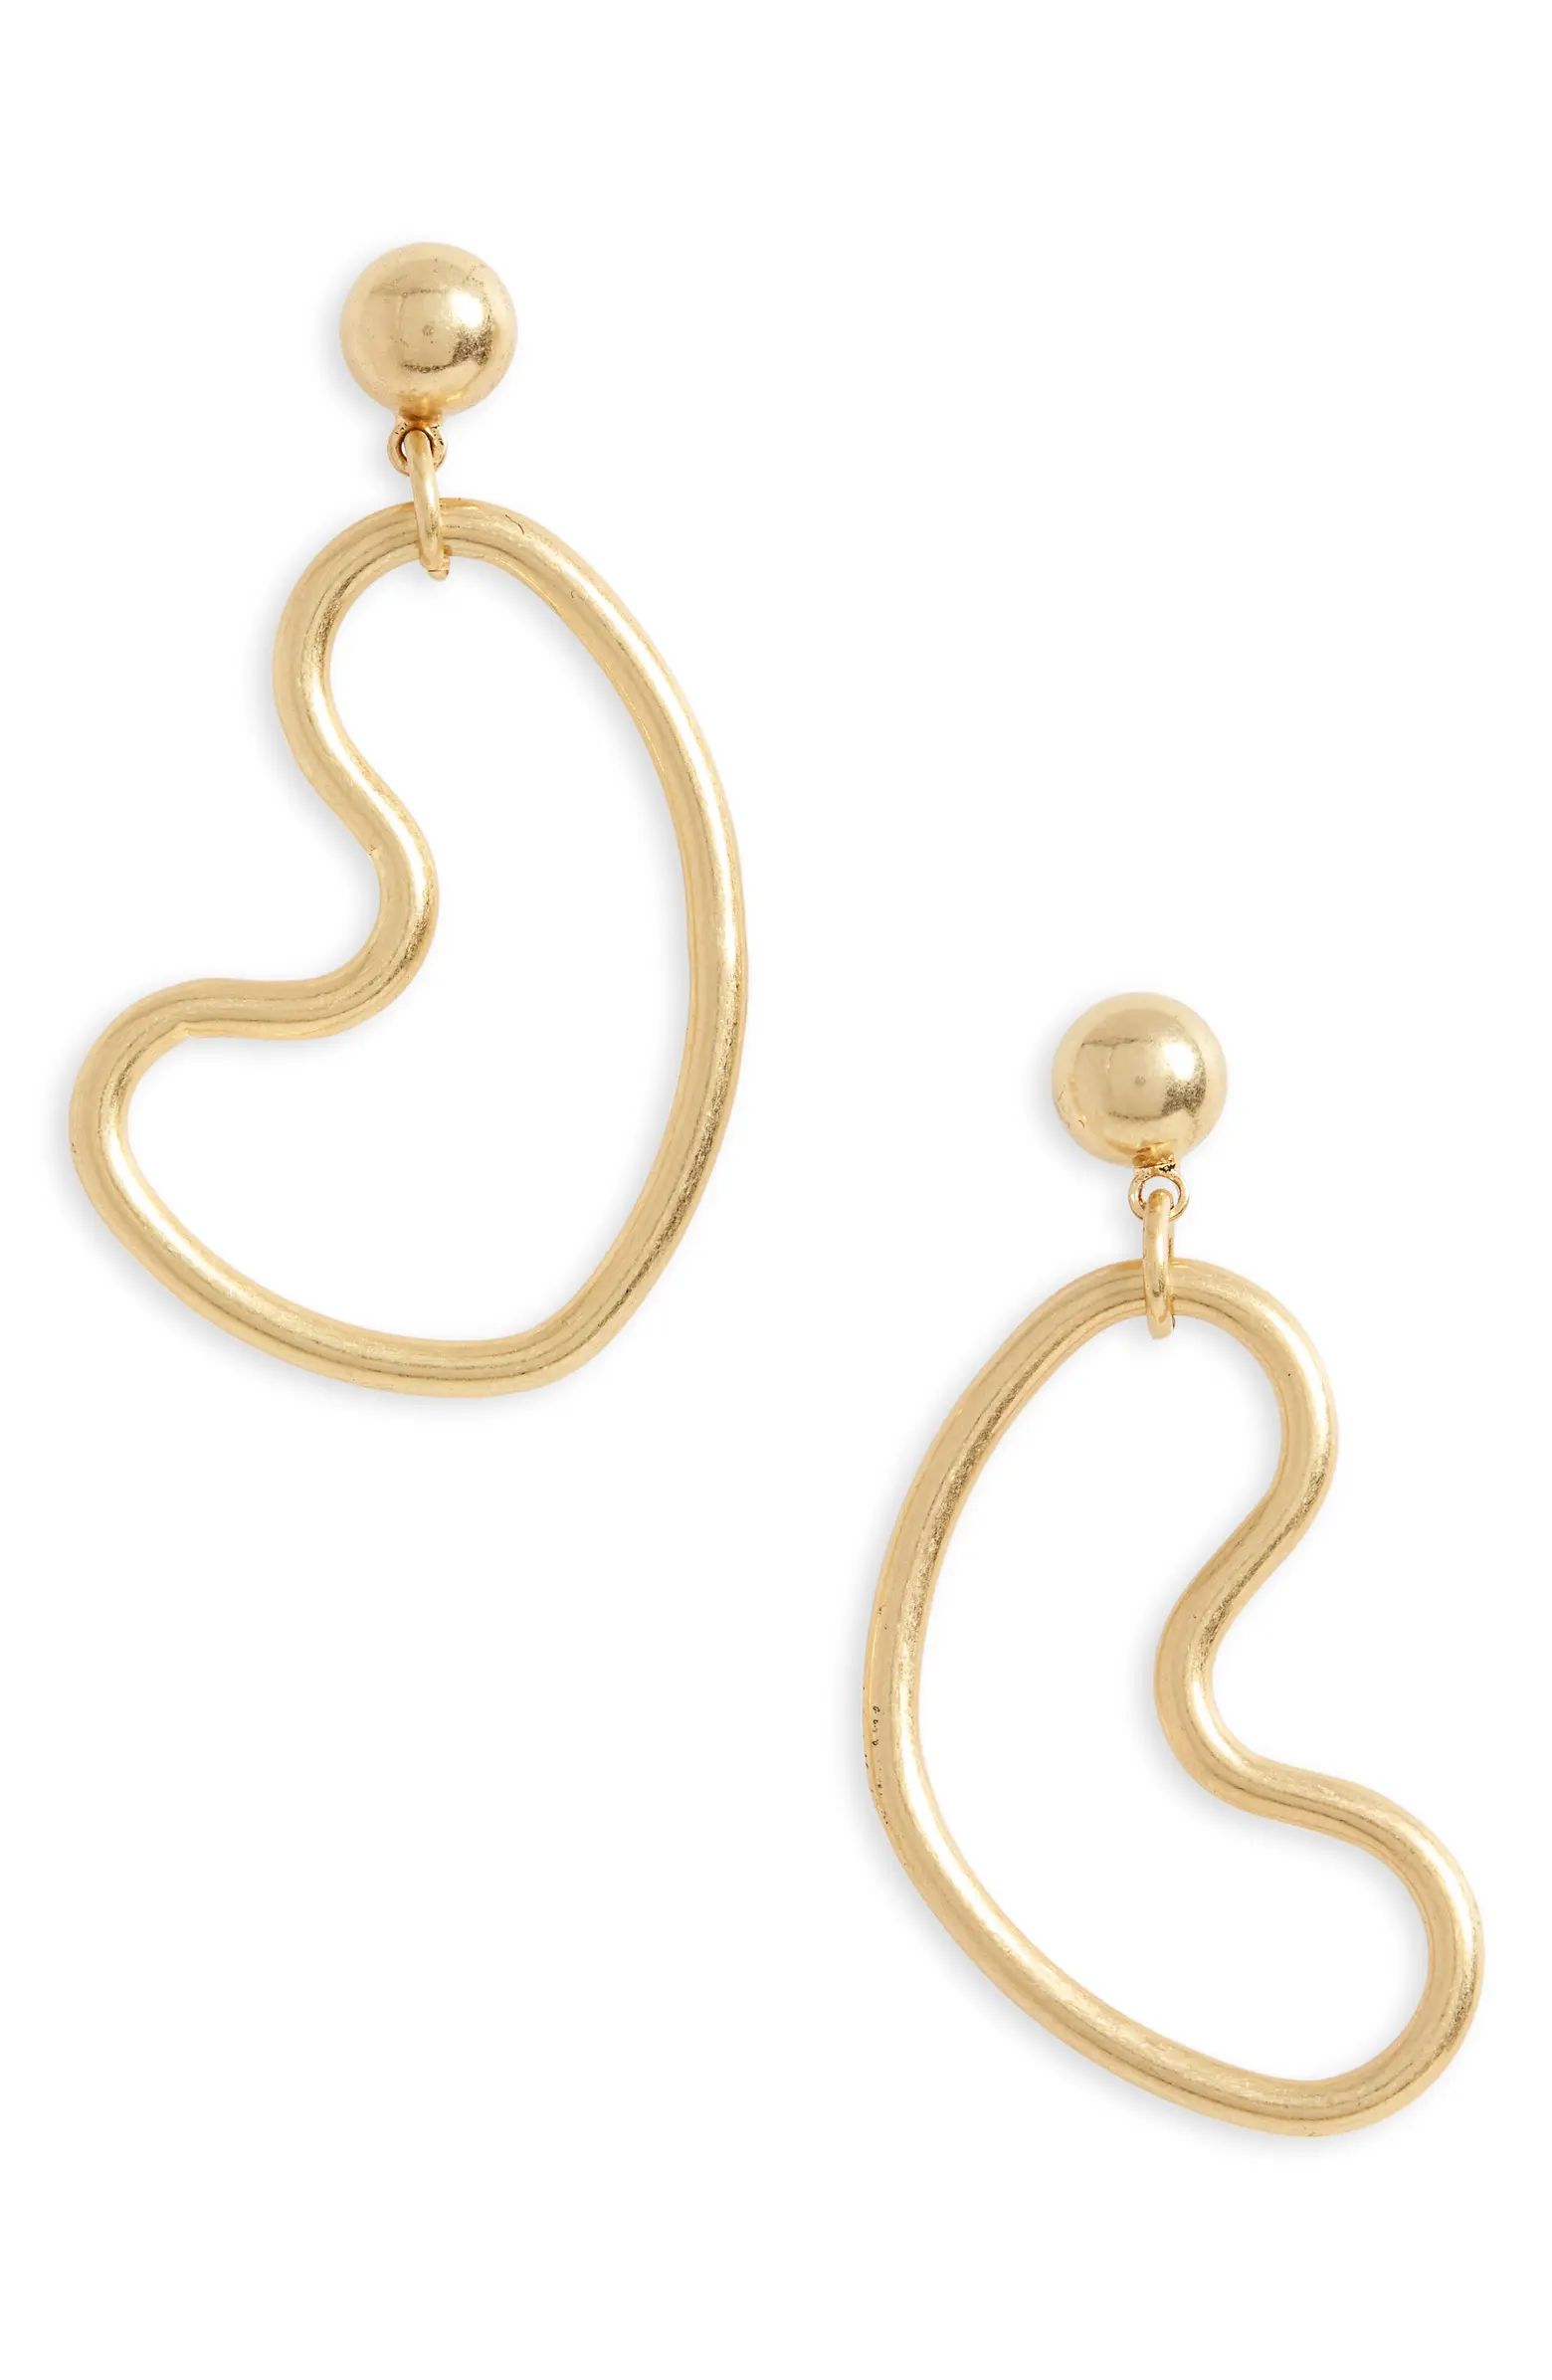 Bold Squiggles Statement Earrings | Nordstrom Rack